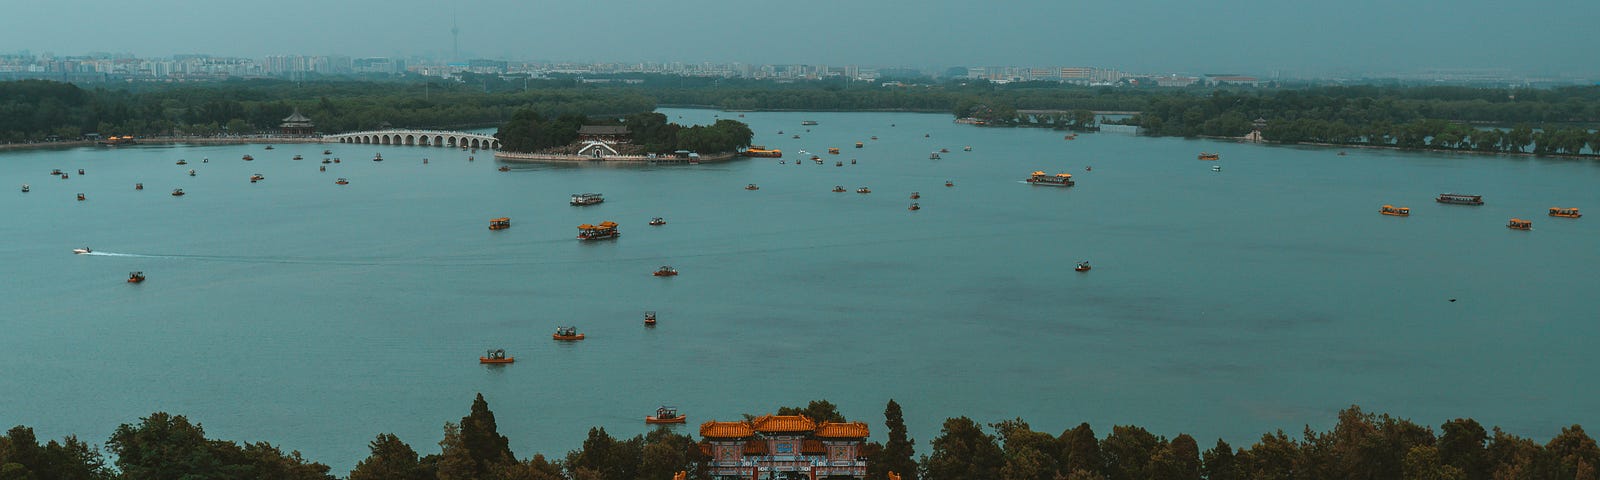 Overlook of a traditional Chinese palace with a body of water in front.